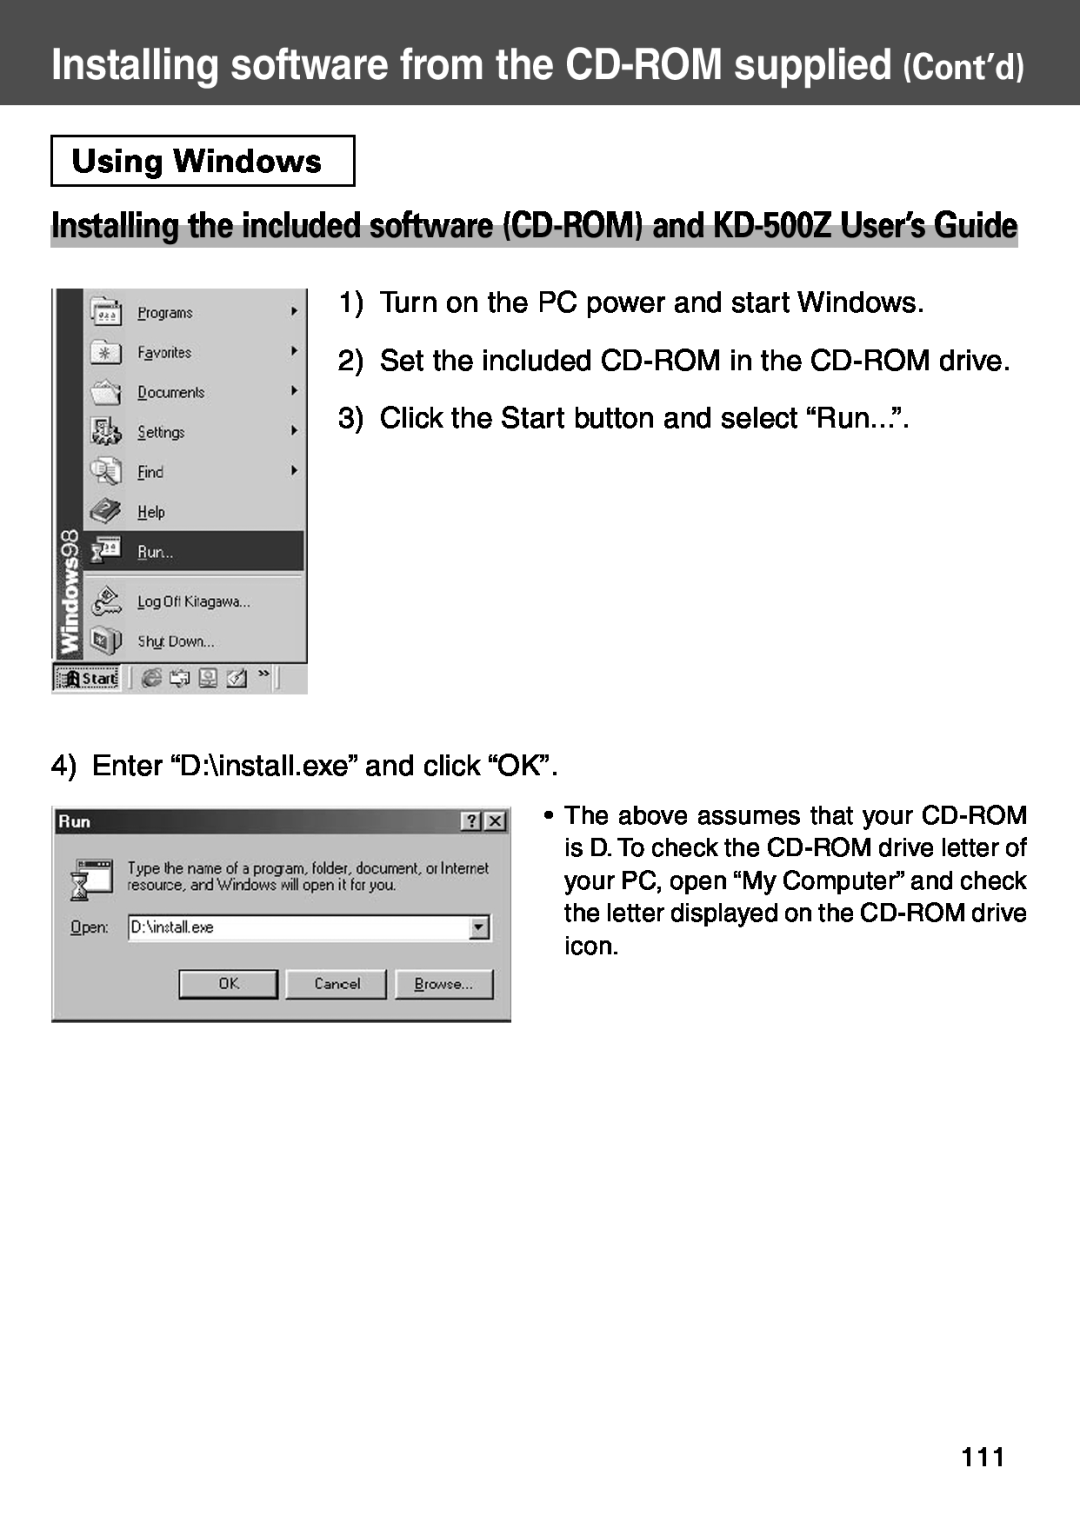 Konica Minolta user manual Using Windows, Installing the included software CD-ROM and KD-500Z User’s Guide 